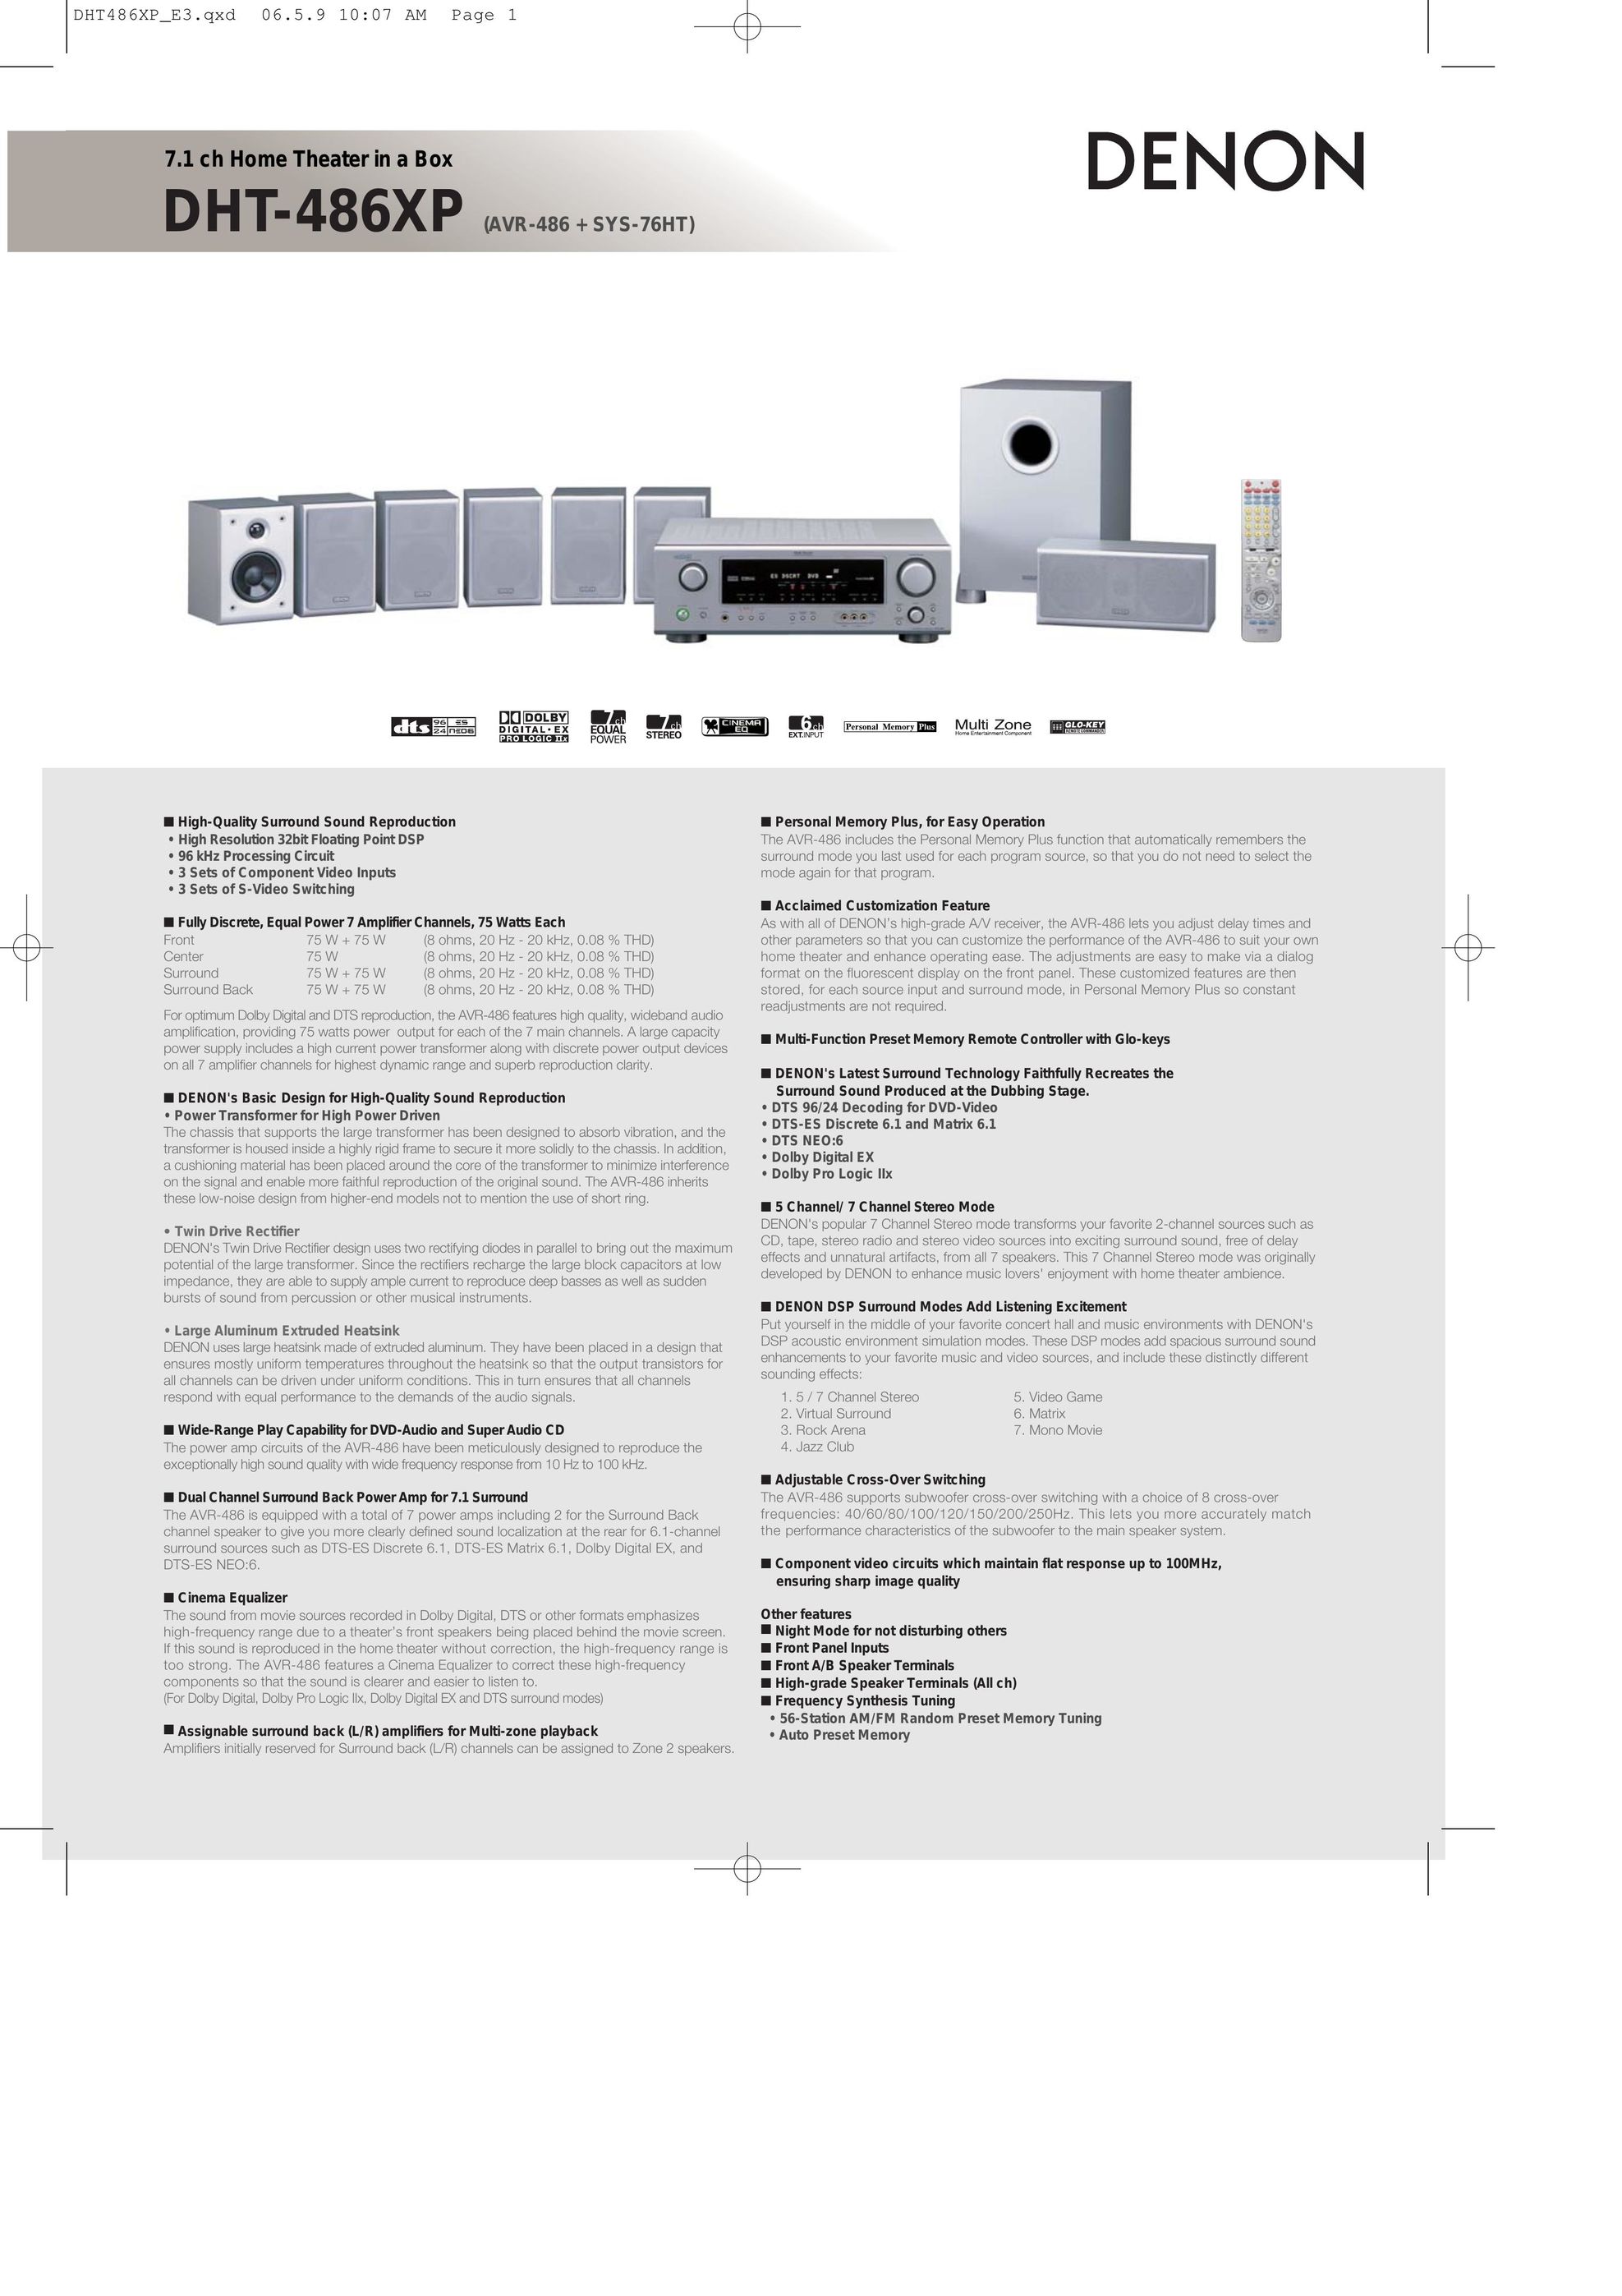 Denon DHT-486XP Home Theater System User Manual